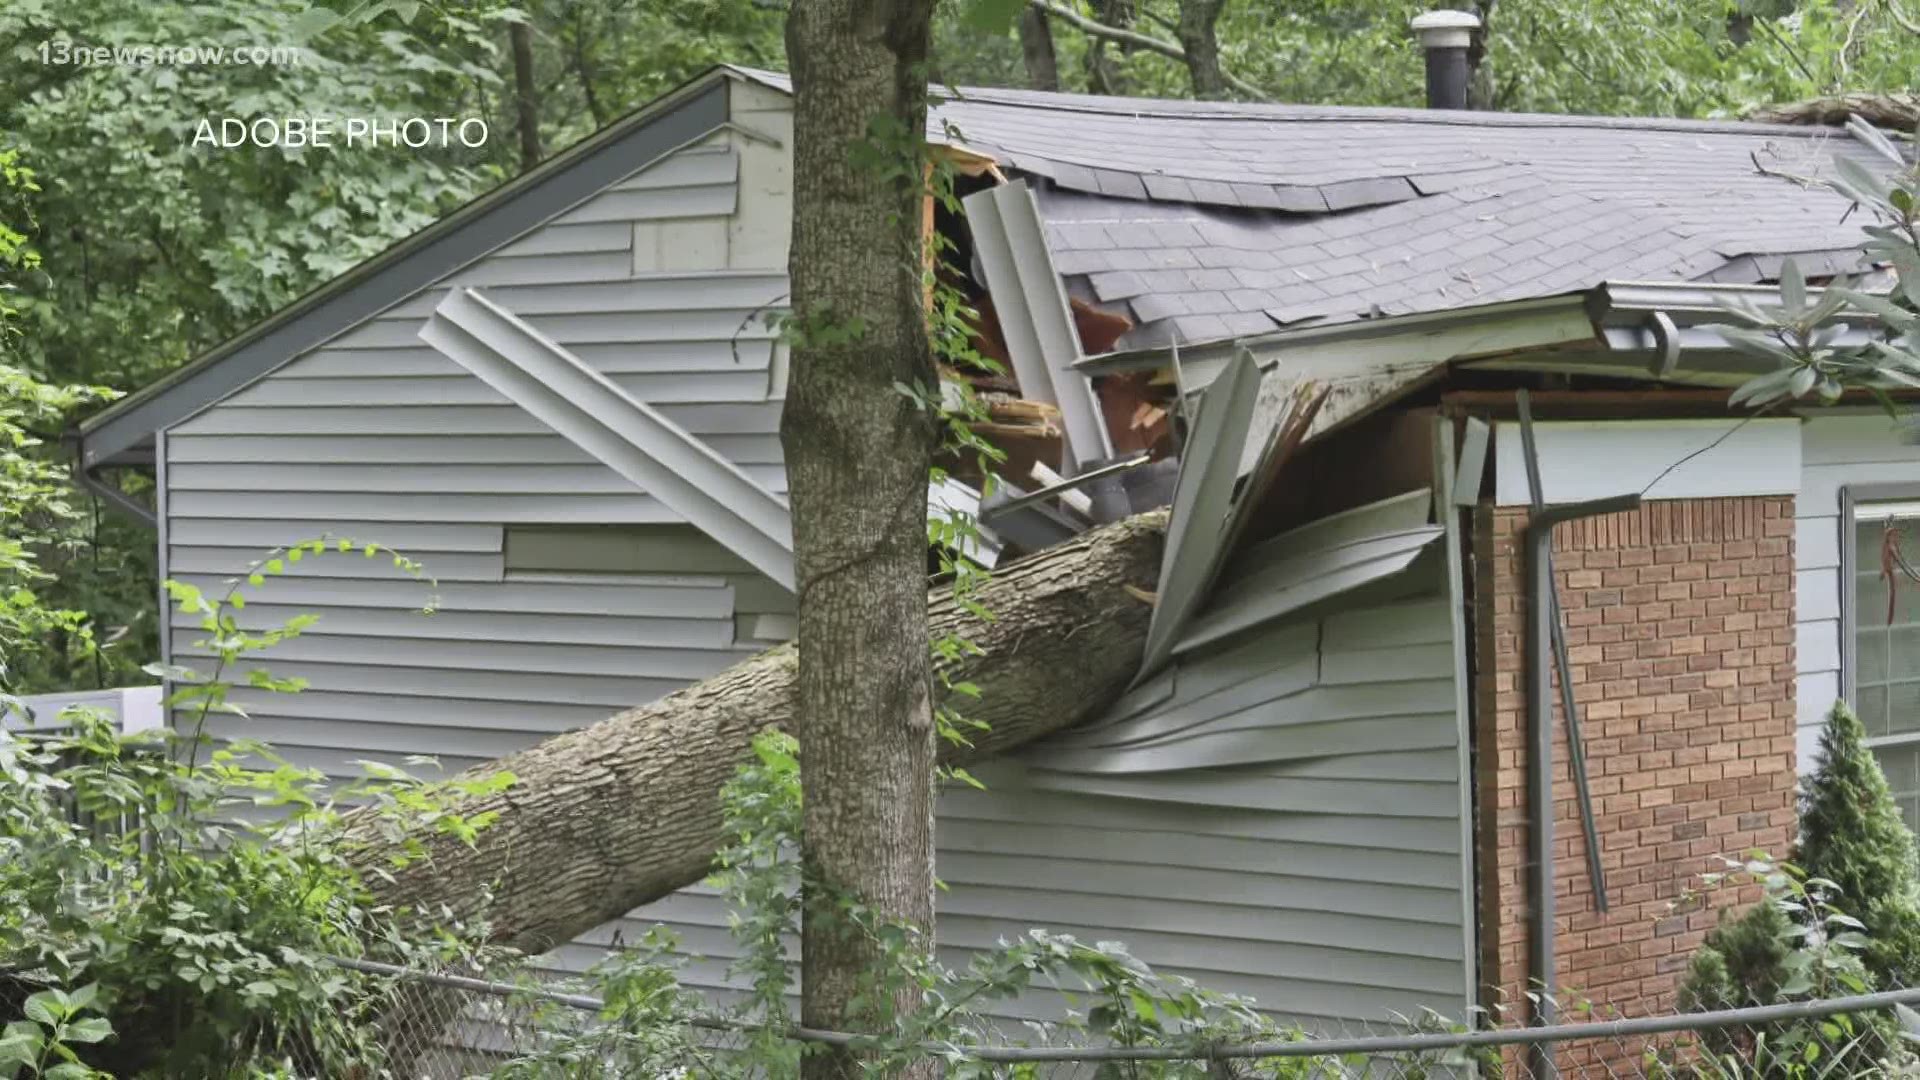 With Tropical Storm Elsa making its way up the East Coast, the Verify team looked into who is responsible for a toppled tree that lands on a home.